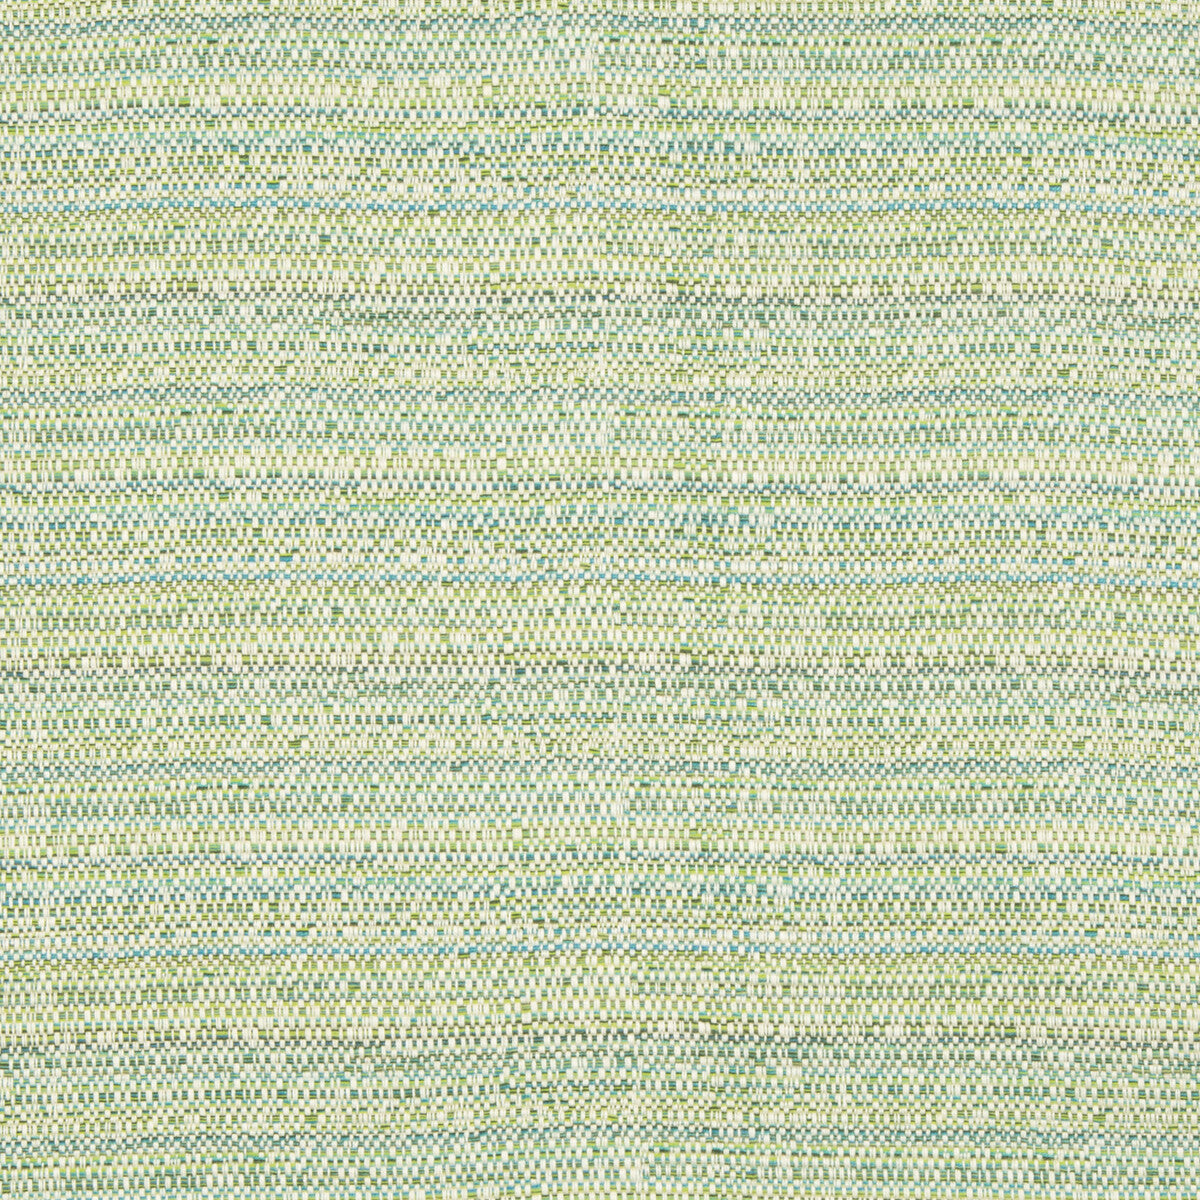 Kravet Couture fabric in 34274-3 color - pattern 34274.3.0 - by Kravet Couture in the Sunbrella collection